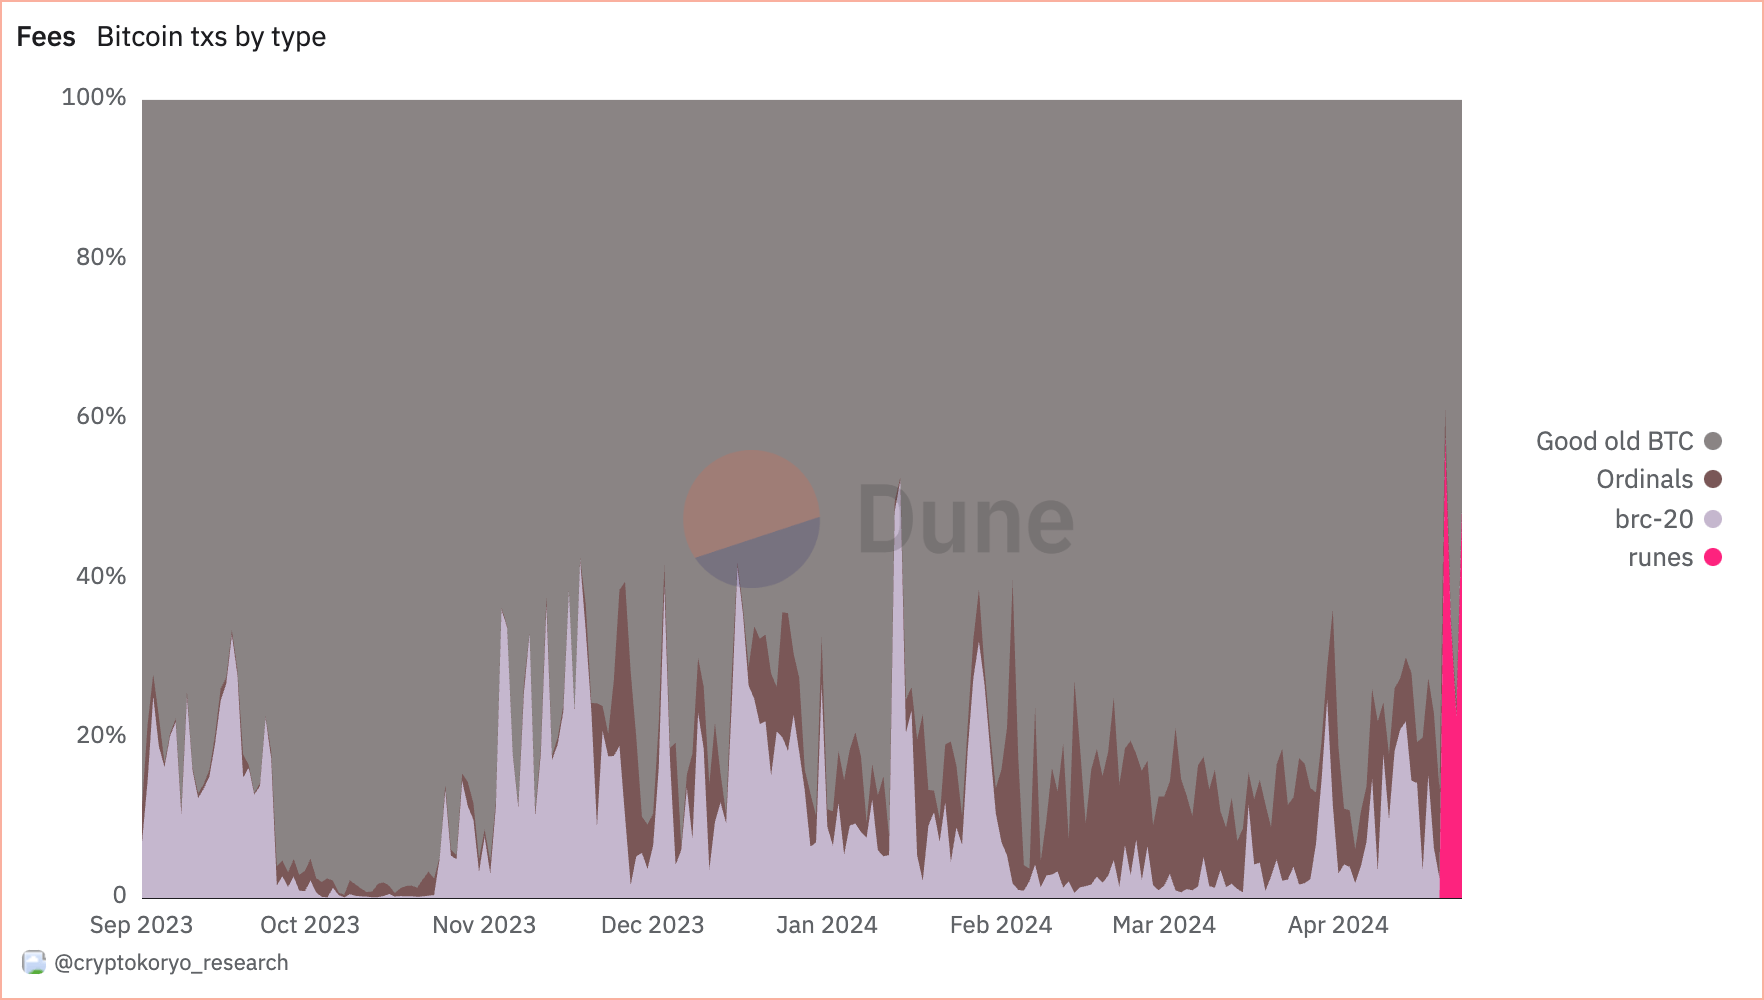 Bitcoin fees by transaction type